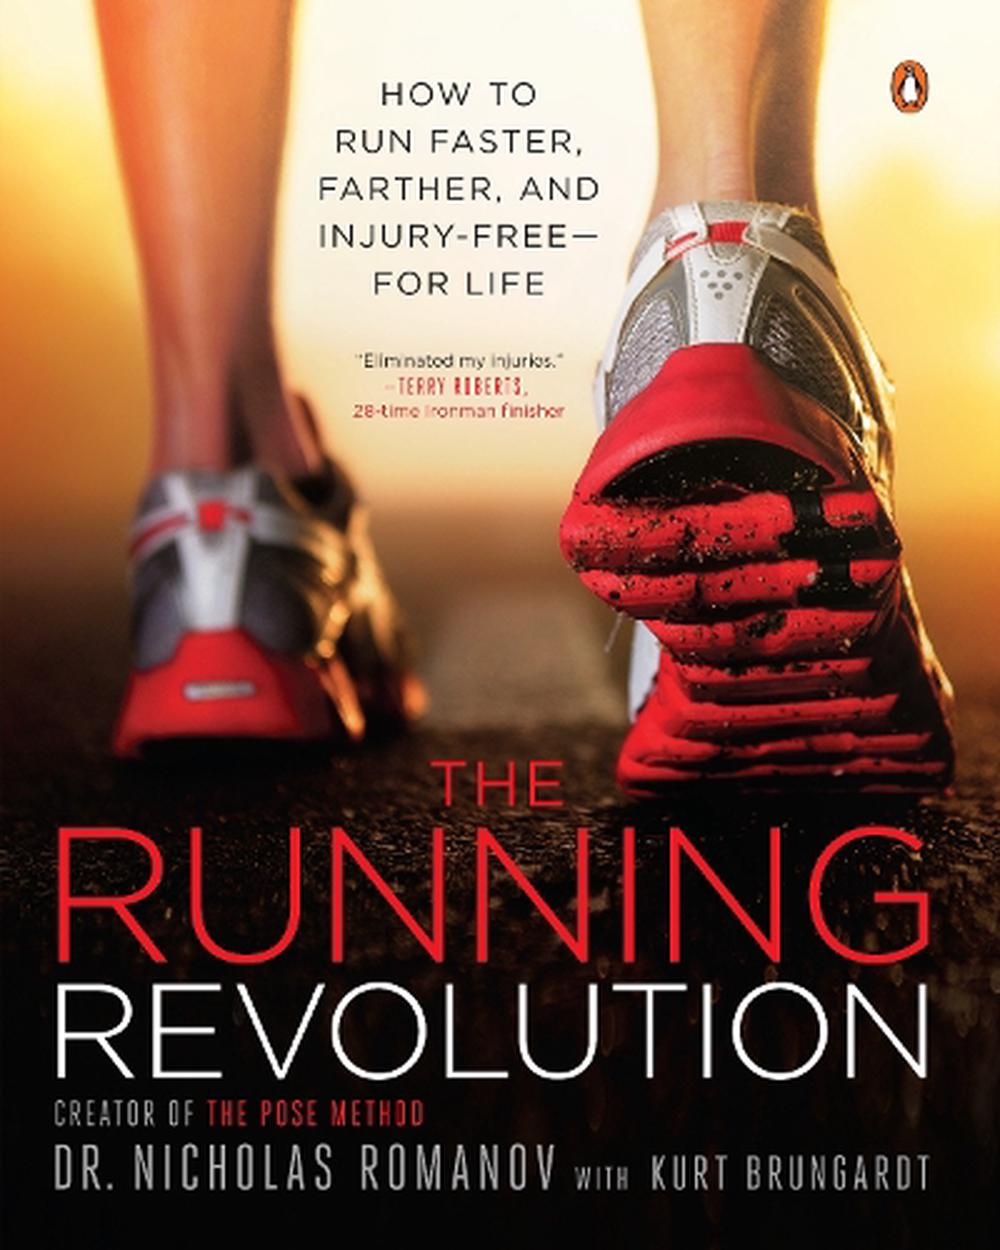 Revolution　9780143123194　online　The　Running　The　Romanov,　by　Nicholas　at　Paperback,　Buy　Nile